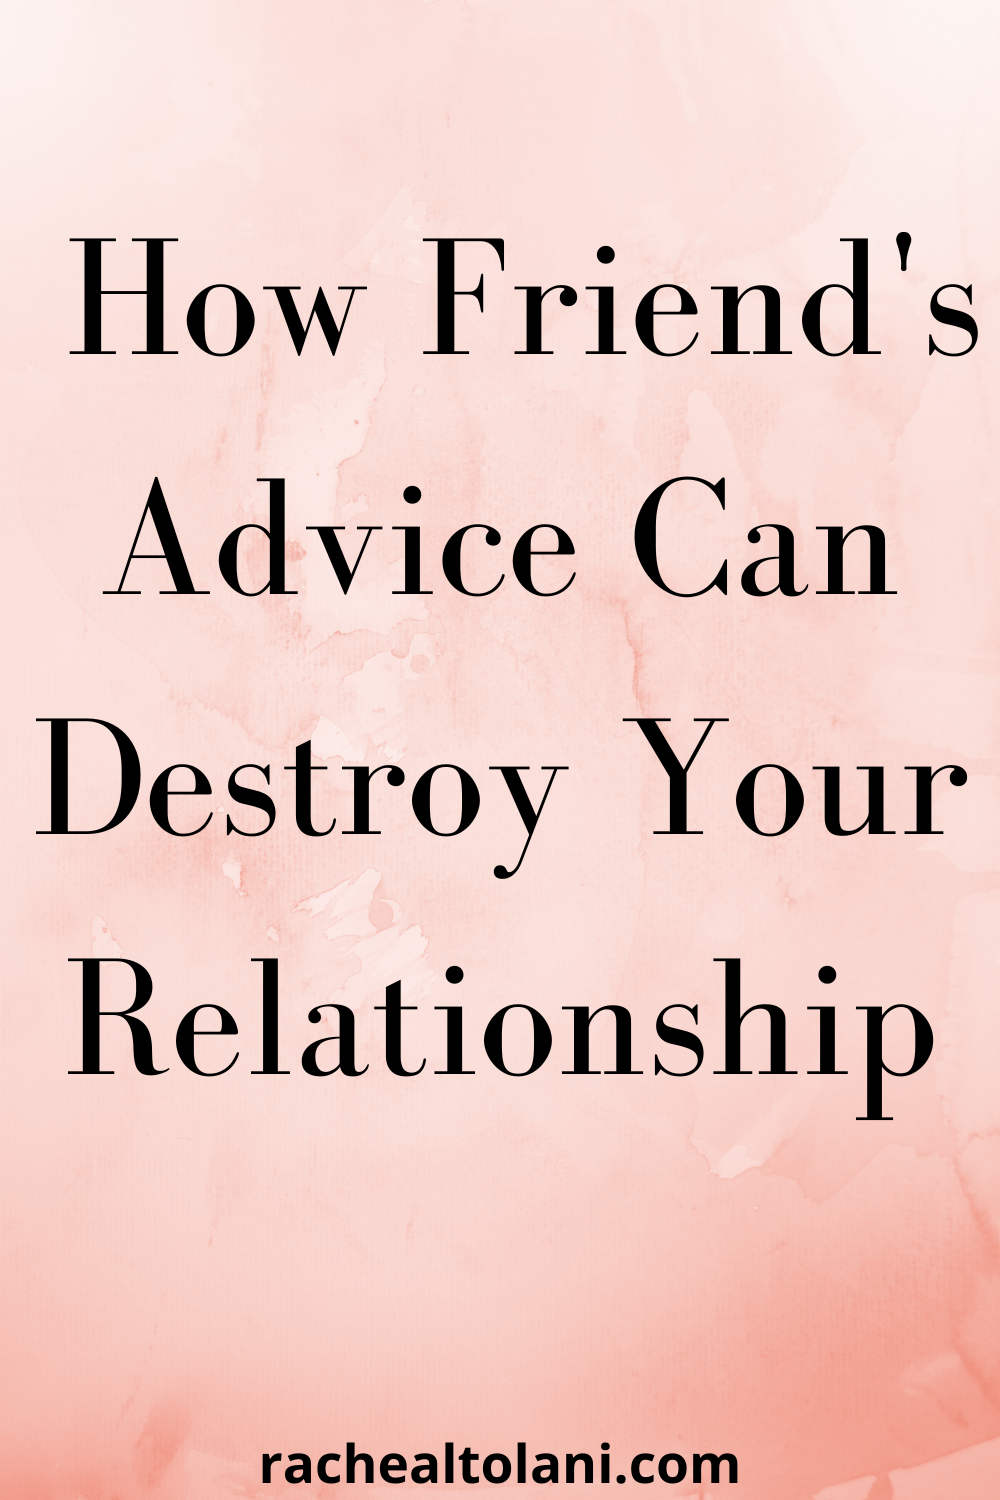 Why You Should Stop Asking Your Friend for Relationship Advice